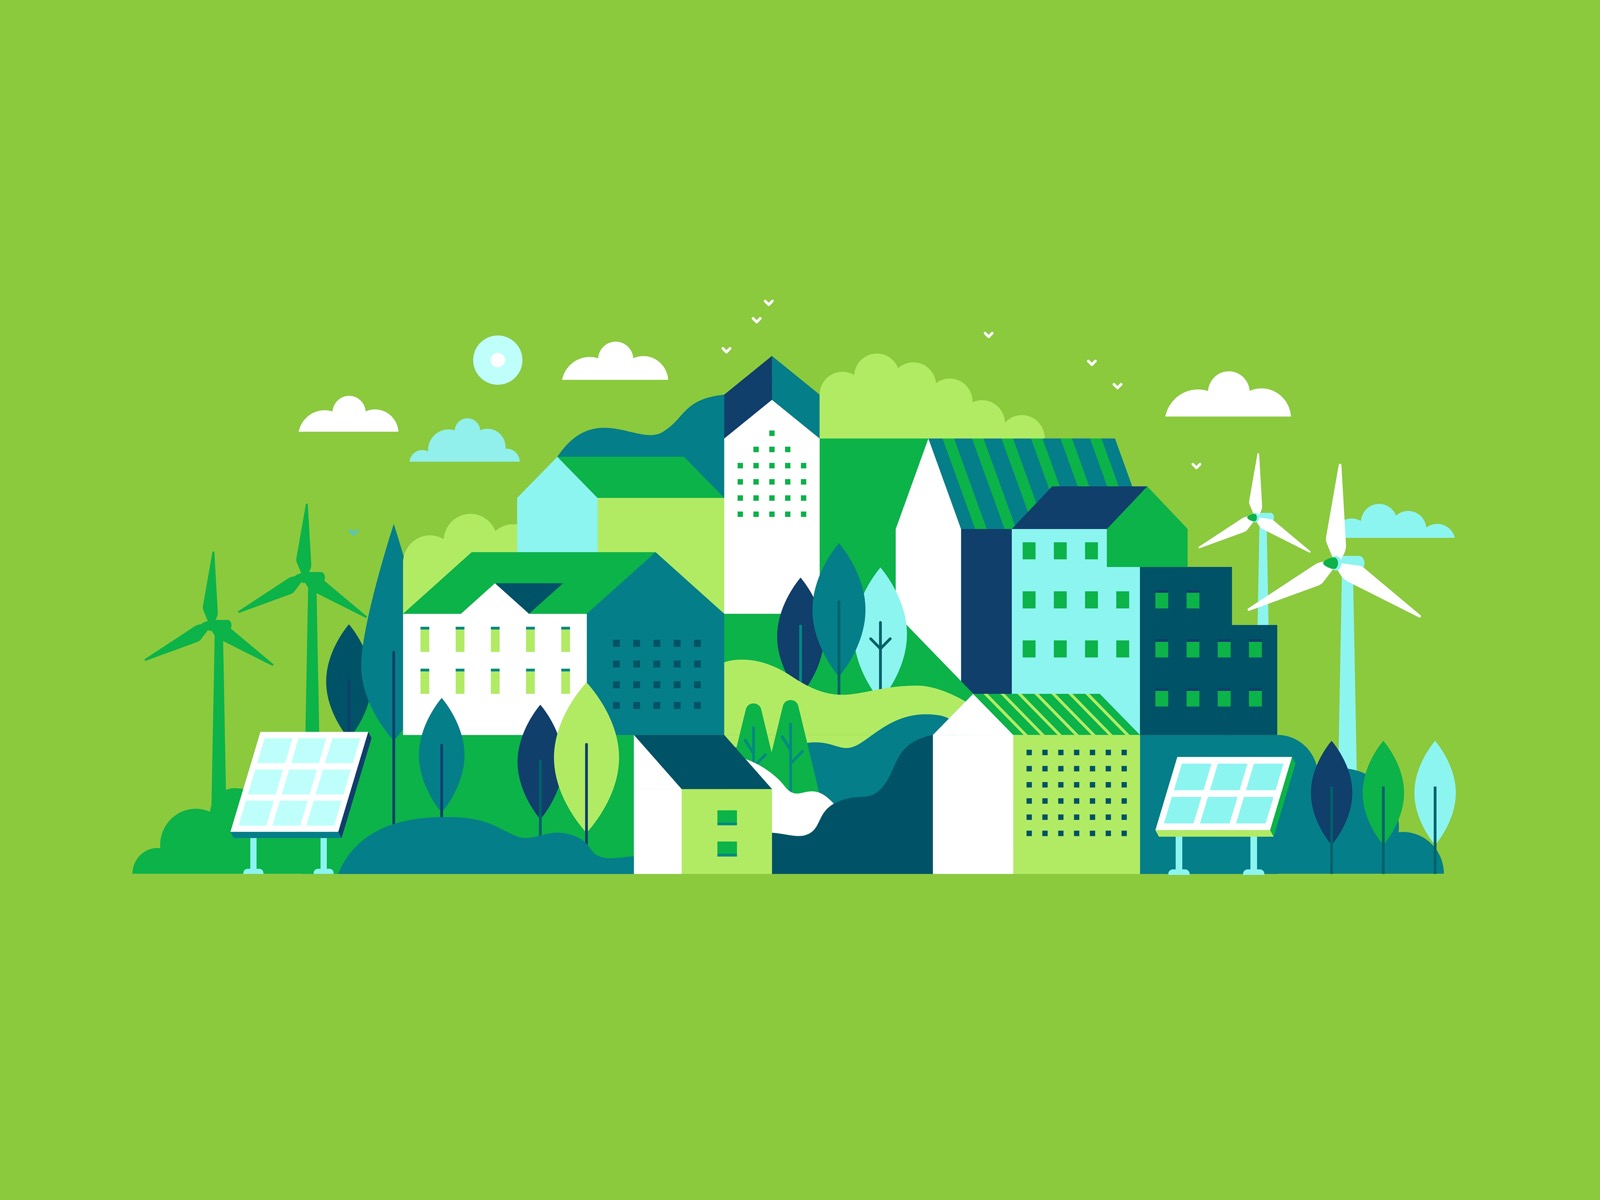  illustration in simple minimal geometric flat style - city landscape with buildings, hills and trees with solar panels and wind turbines